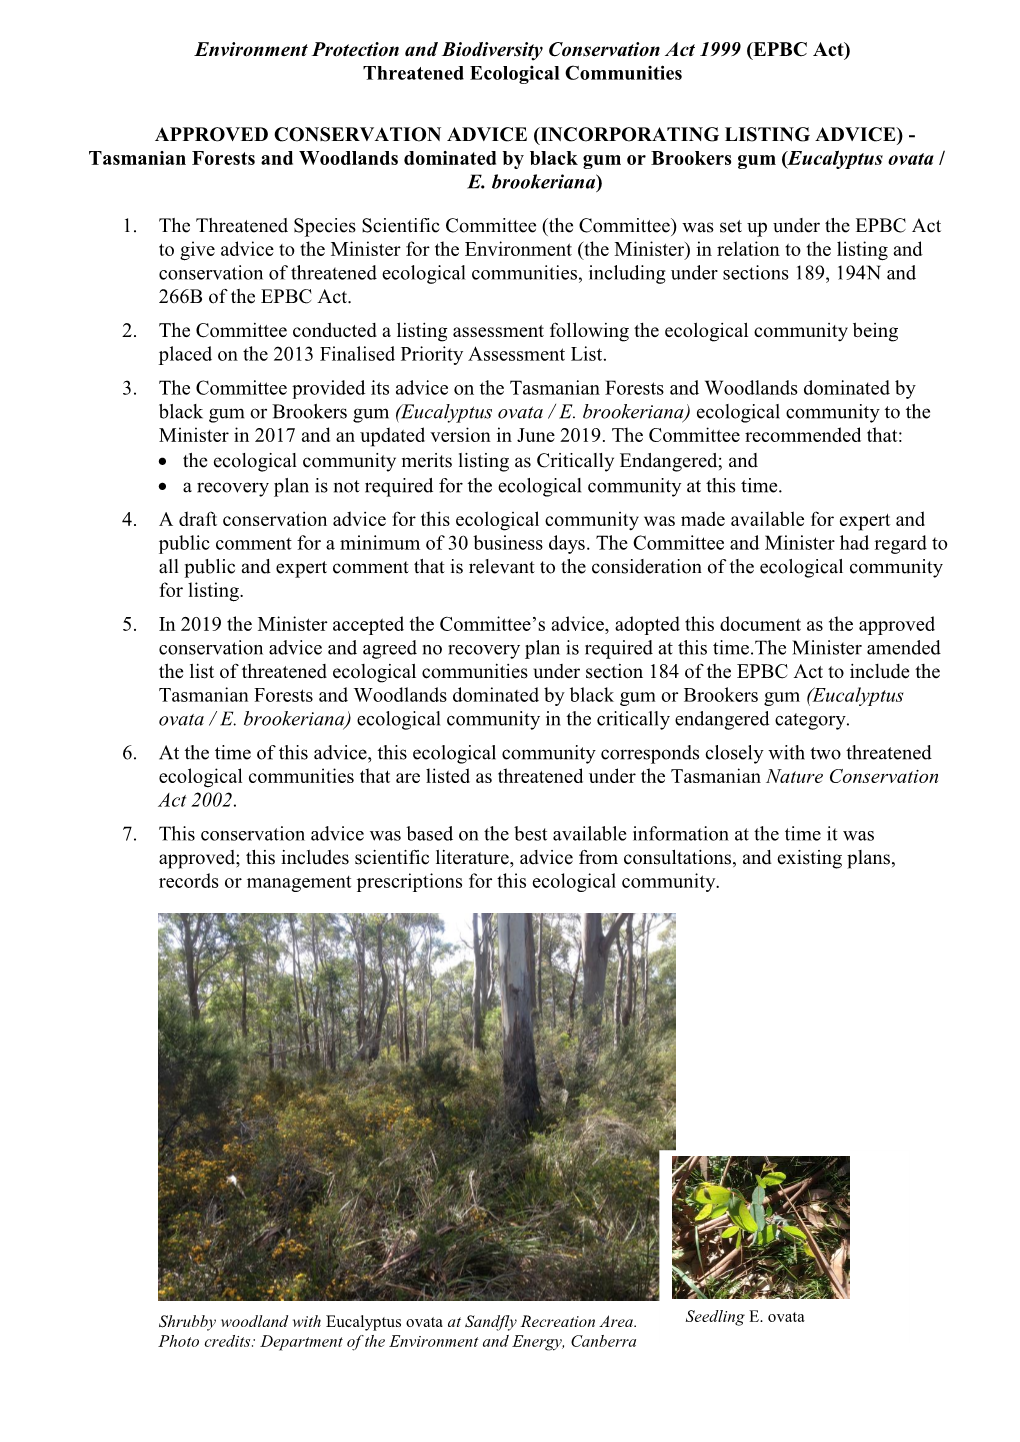 Conservation Advice Tas Ovata Brookeriana Forests and Woodlands